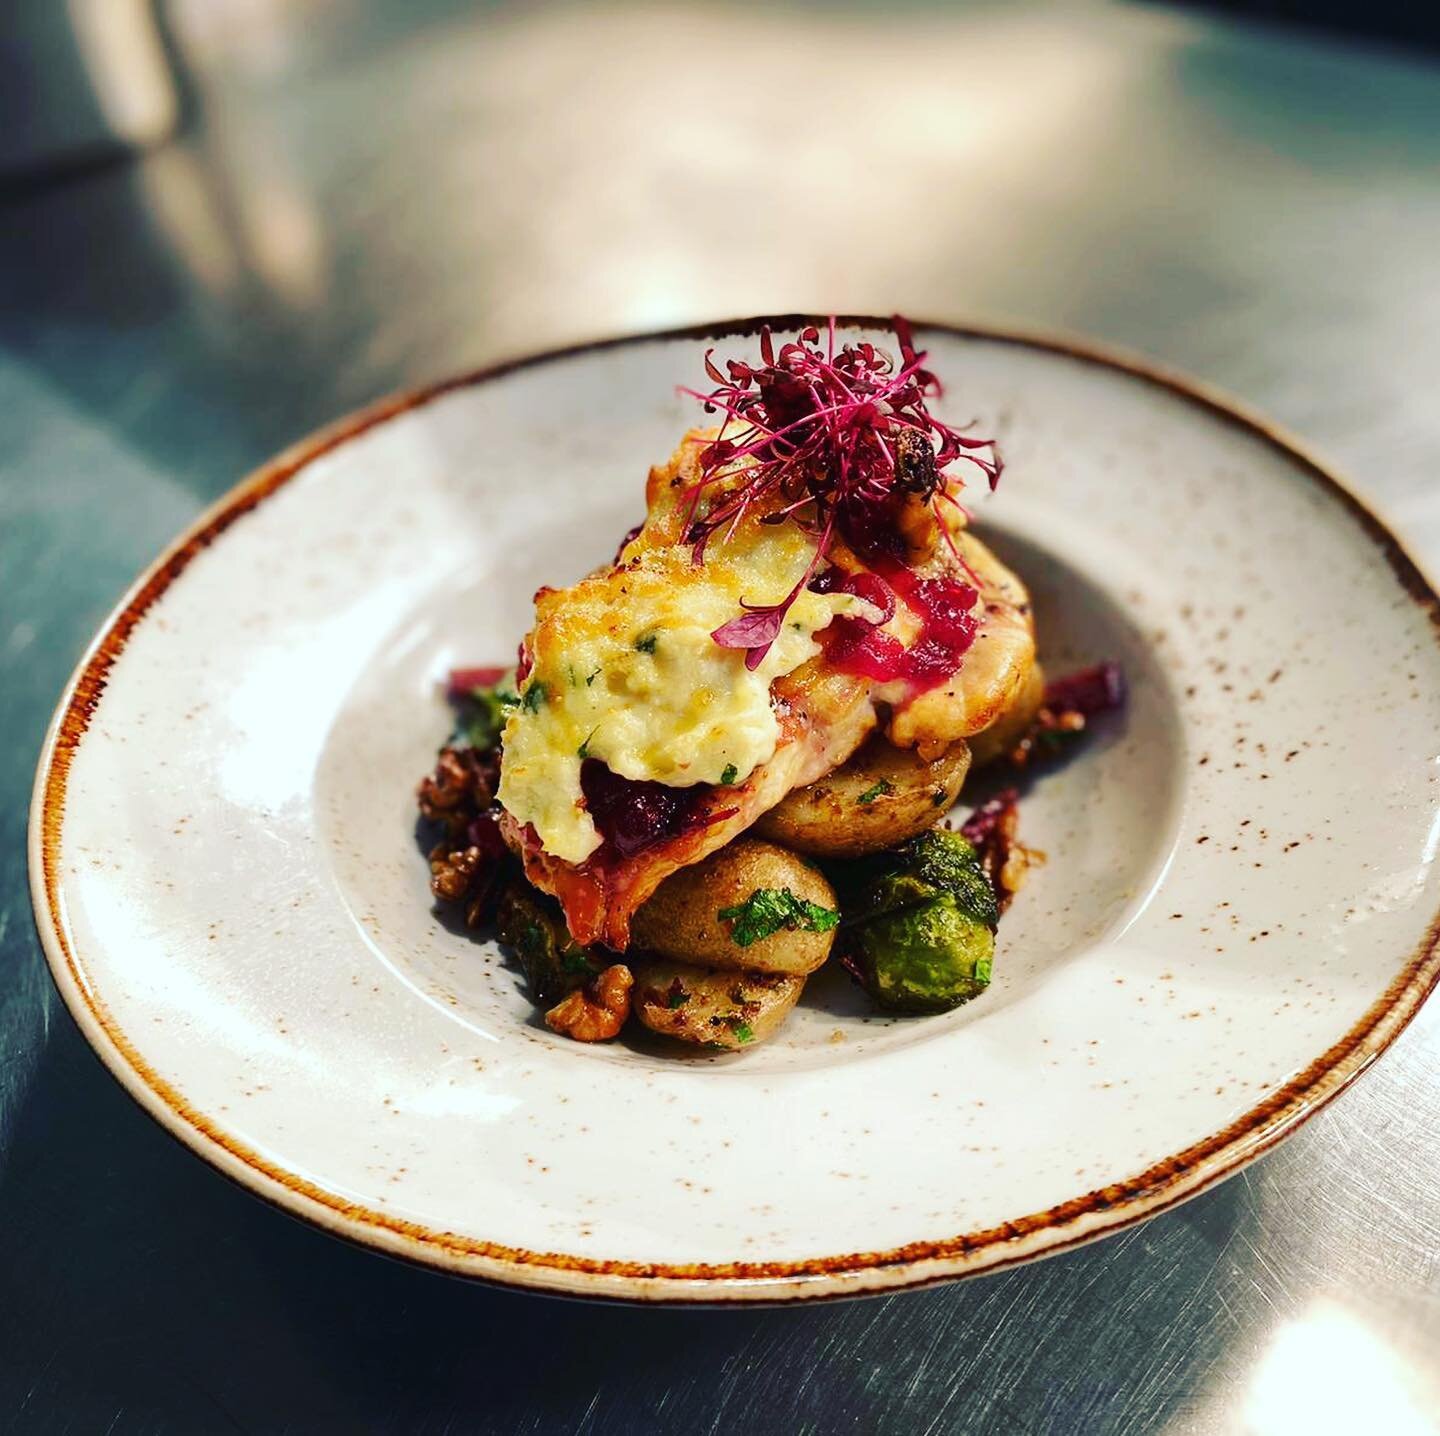 New menu, same great quality!

Pan Roasted Corn Fed Chicken with Brie &amp; Cranberry Crust.

Pancake Cannelloni with Fresh Tomato Proven&ccedil;al &amp; Buffalo Mozzarella.

Check our Facebook Page for the full menu

#roebuckotley